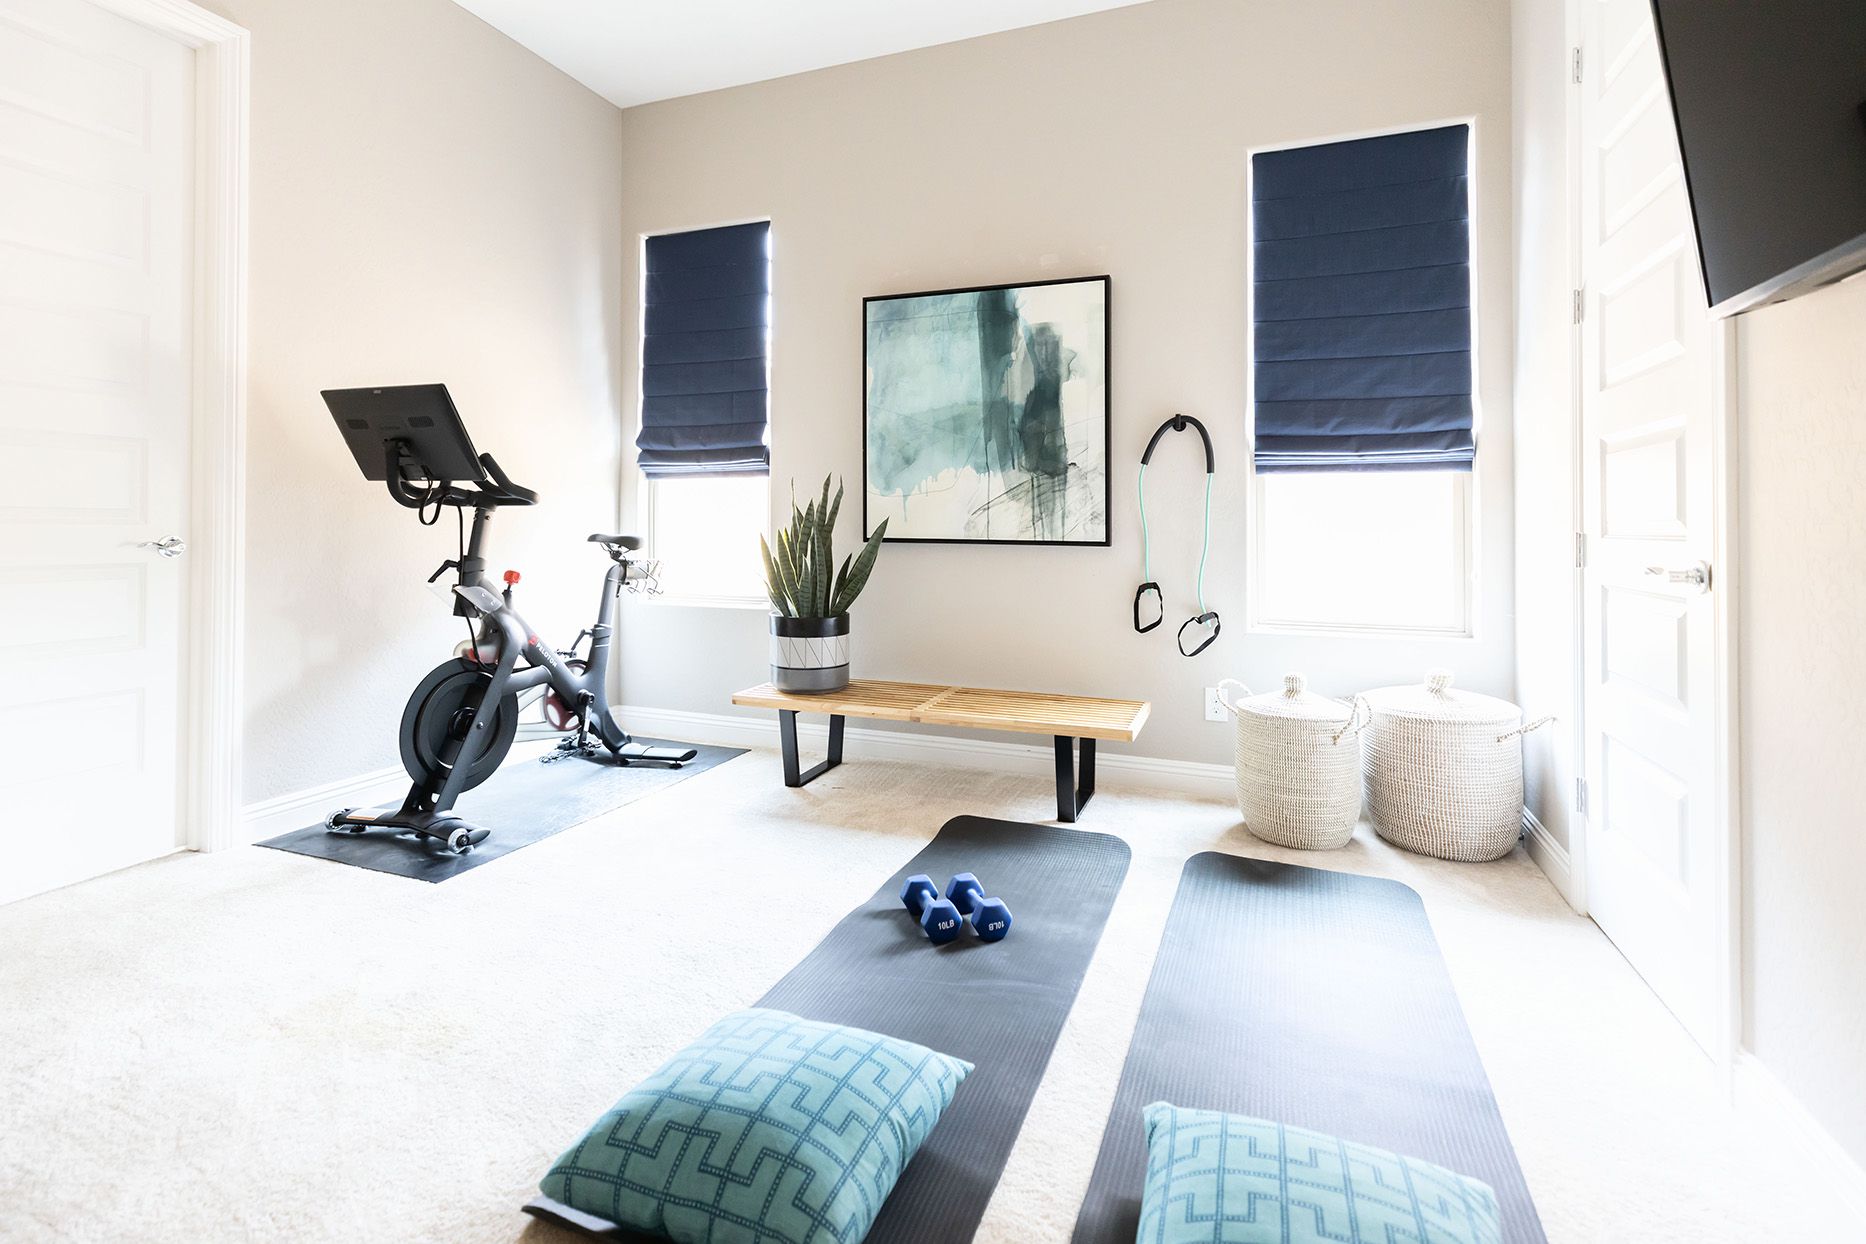 Is It Necessary To Have A Dedicated Space For A Home Gym, Or Can It Be In A Shared Area?